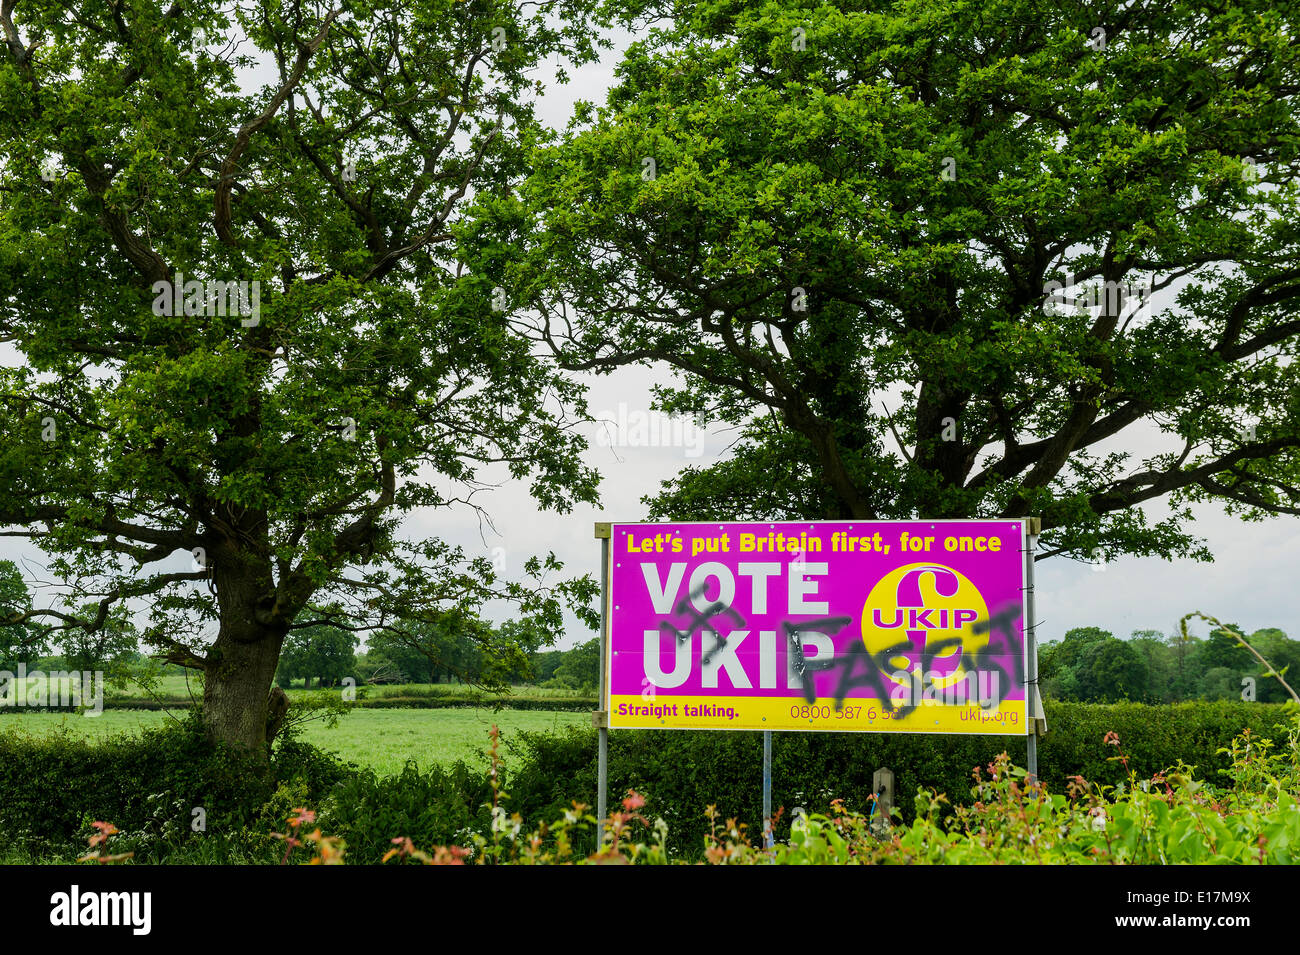 Opinions seen strongly divided near Billingshurst in Sussex over the pros and cons of voting UKIP. Stock Photo